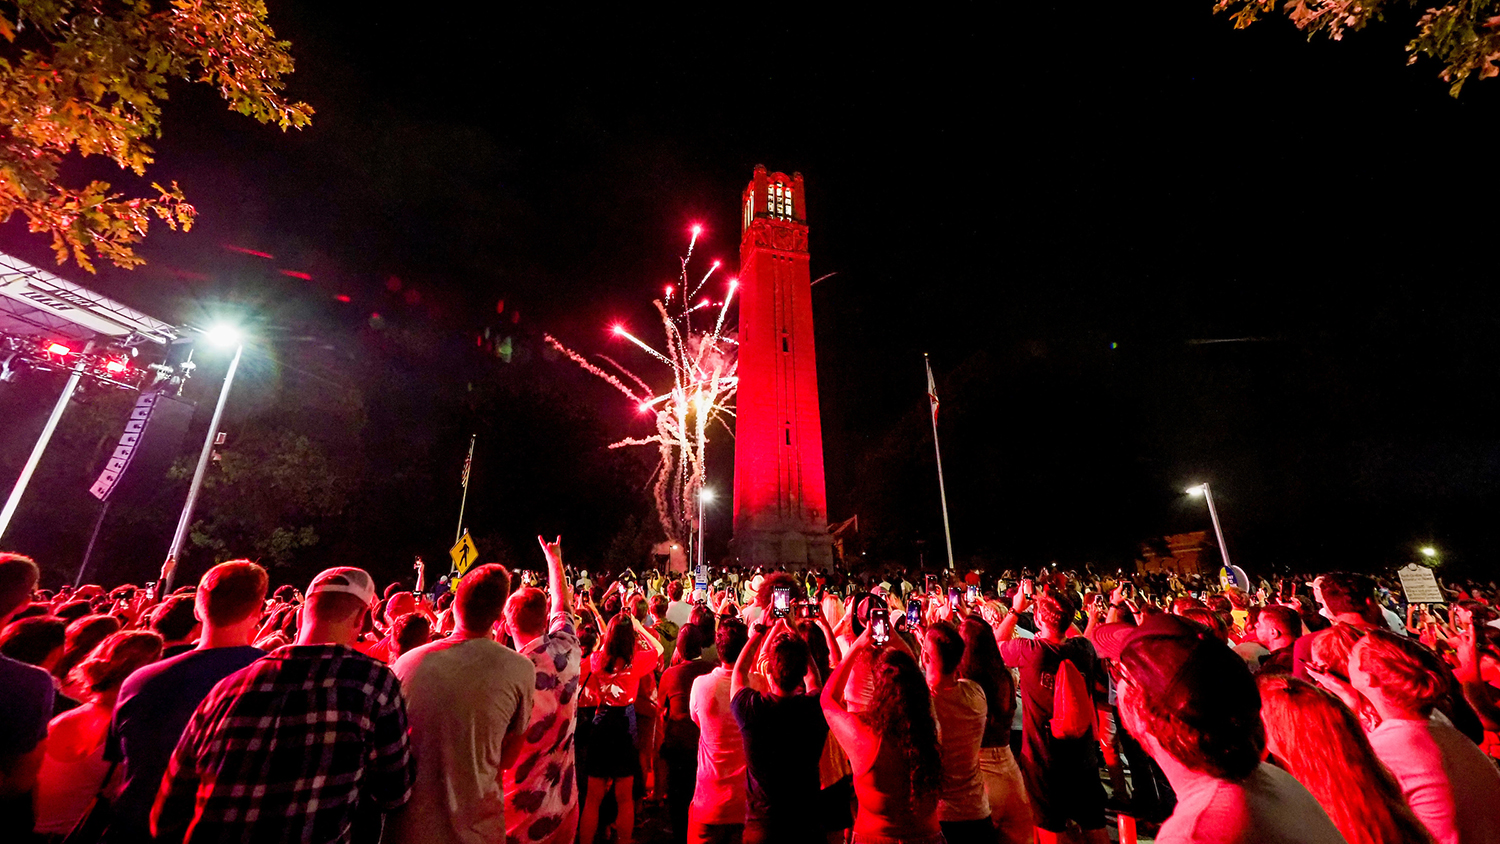 A large crowd gathers during Packapalooza 2022 to watch Wolfpack Welcome Week's grand finale: a dazzling firework show over the Belltower.